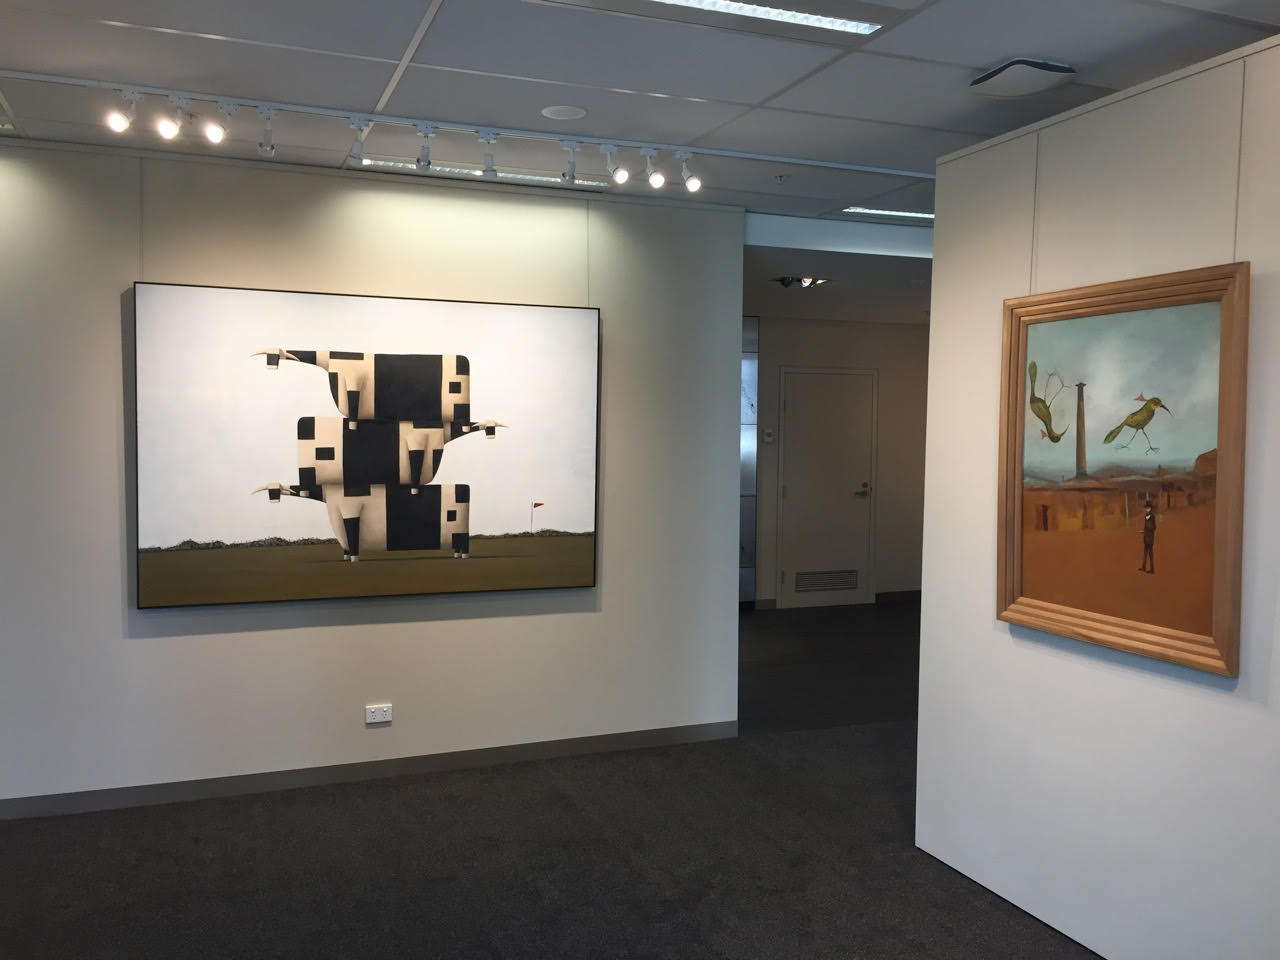 John Kelly painting, juxtaposed with Sidney Nolan painting, Sotheby's Australia, 2018